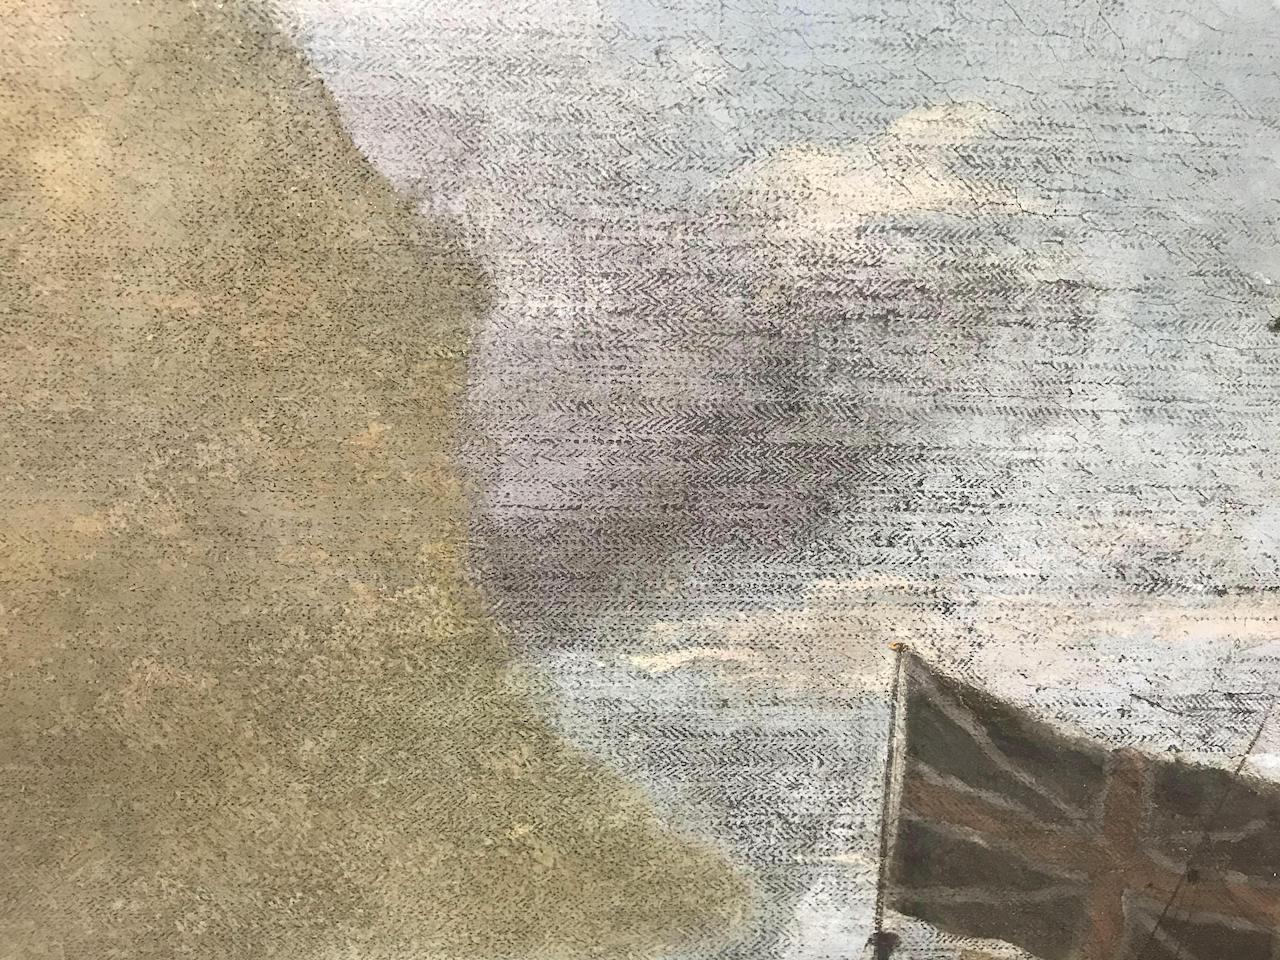 Close up view of a painting during conservation, with a yellowish layer of 'overpaint' on the left and a brighter cloudy view on the right after the overpaint is removed